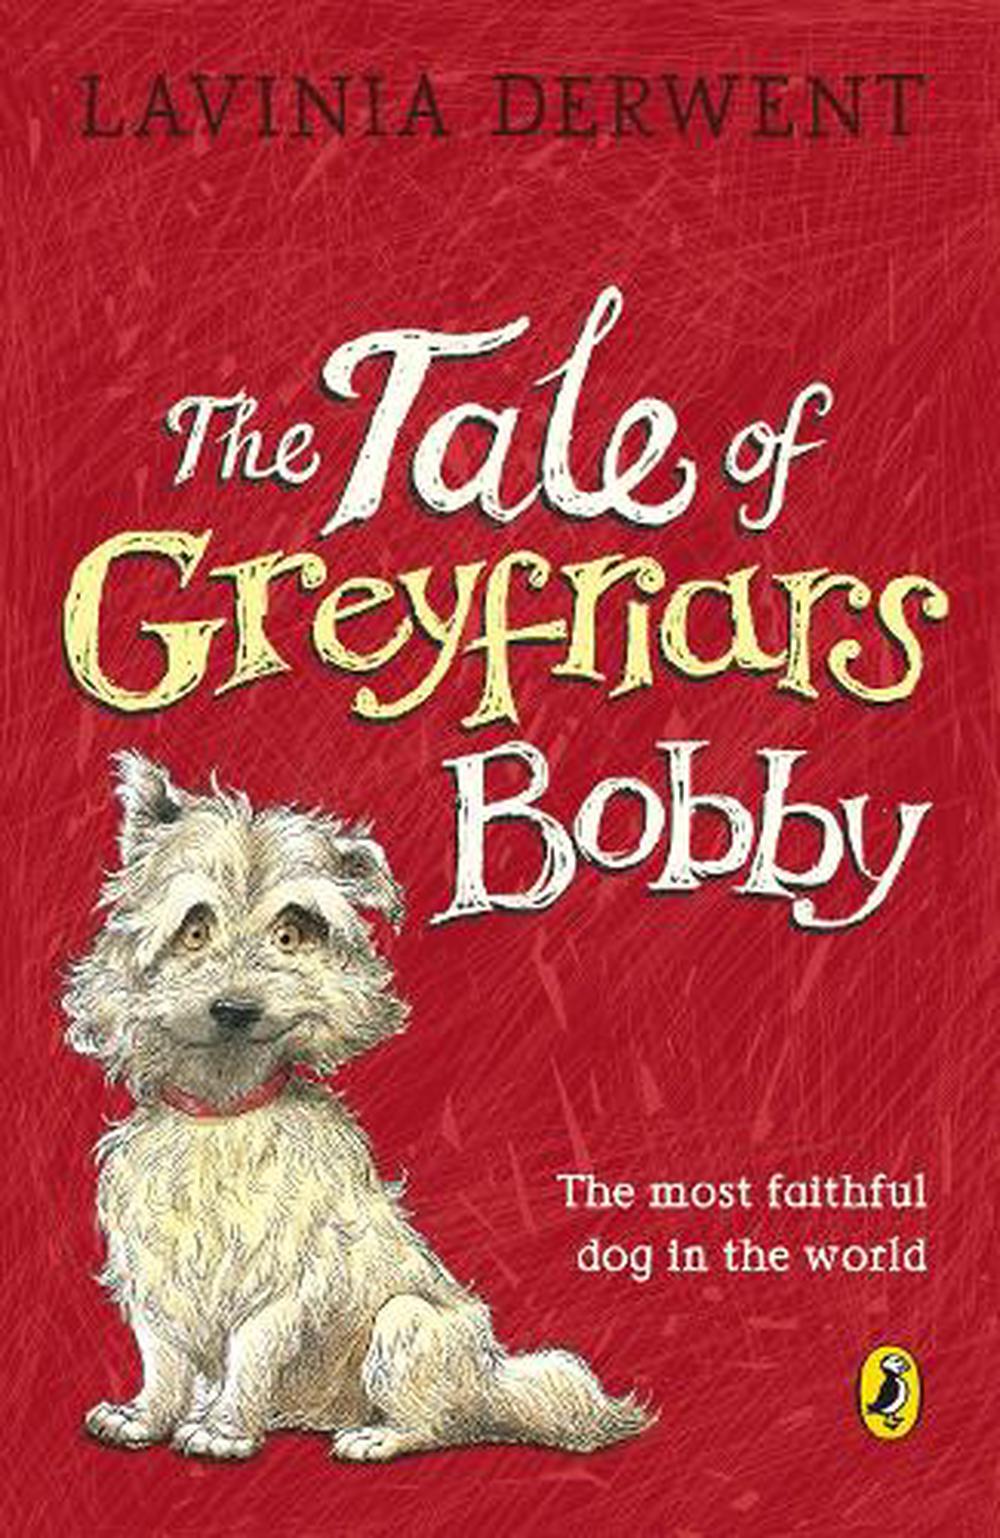 The Tale of Greyfriars Bobby by Lavinia Derwent Paperback Book Free ...